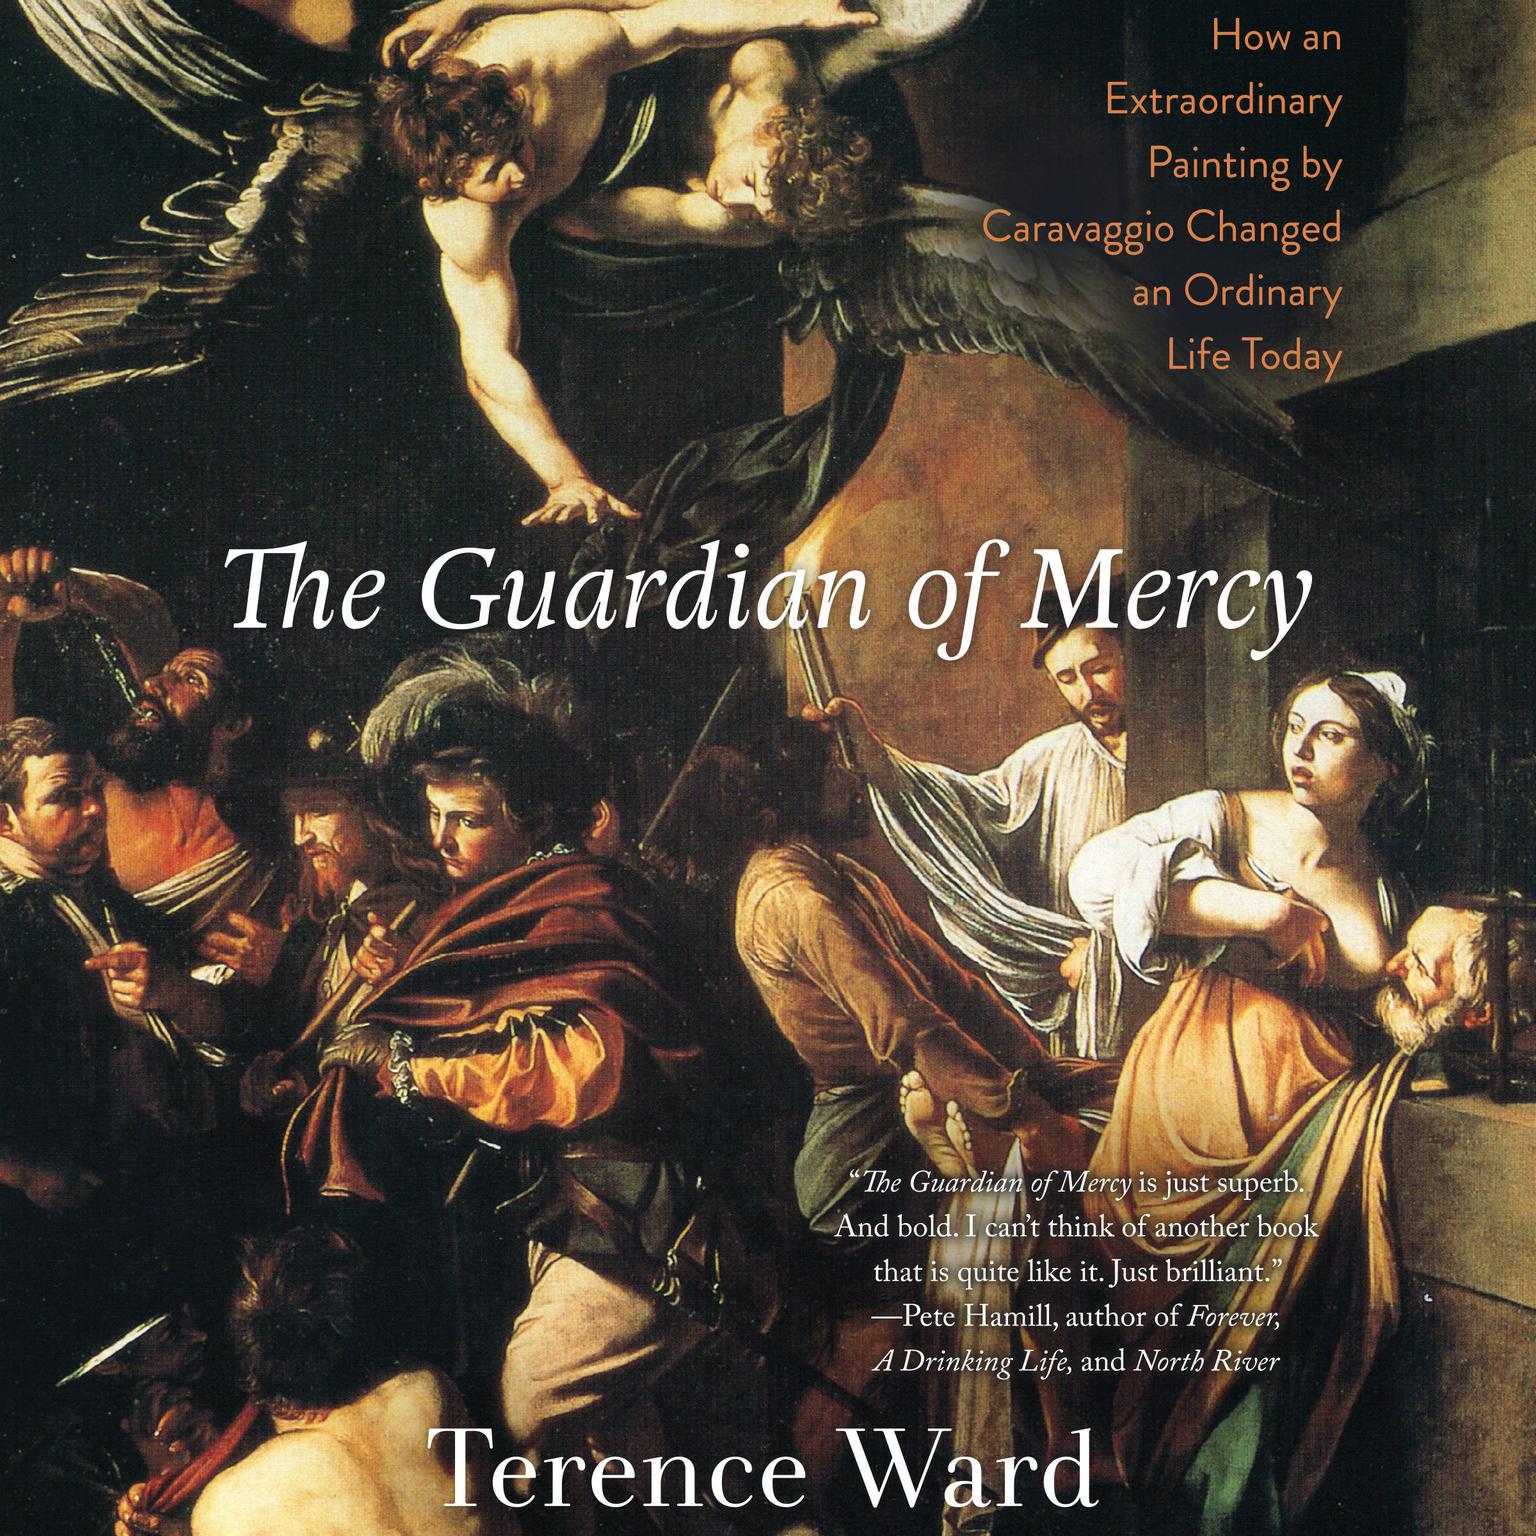 The Guardian of Mercy: How an Extraordinary Painting by Caravaggio Changed an Ordinary Life Today Audiobook, by Terence Ward